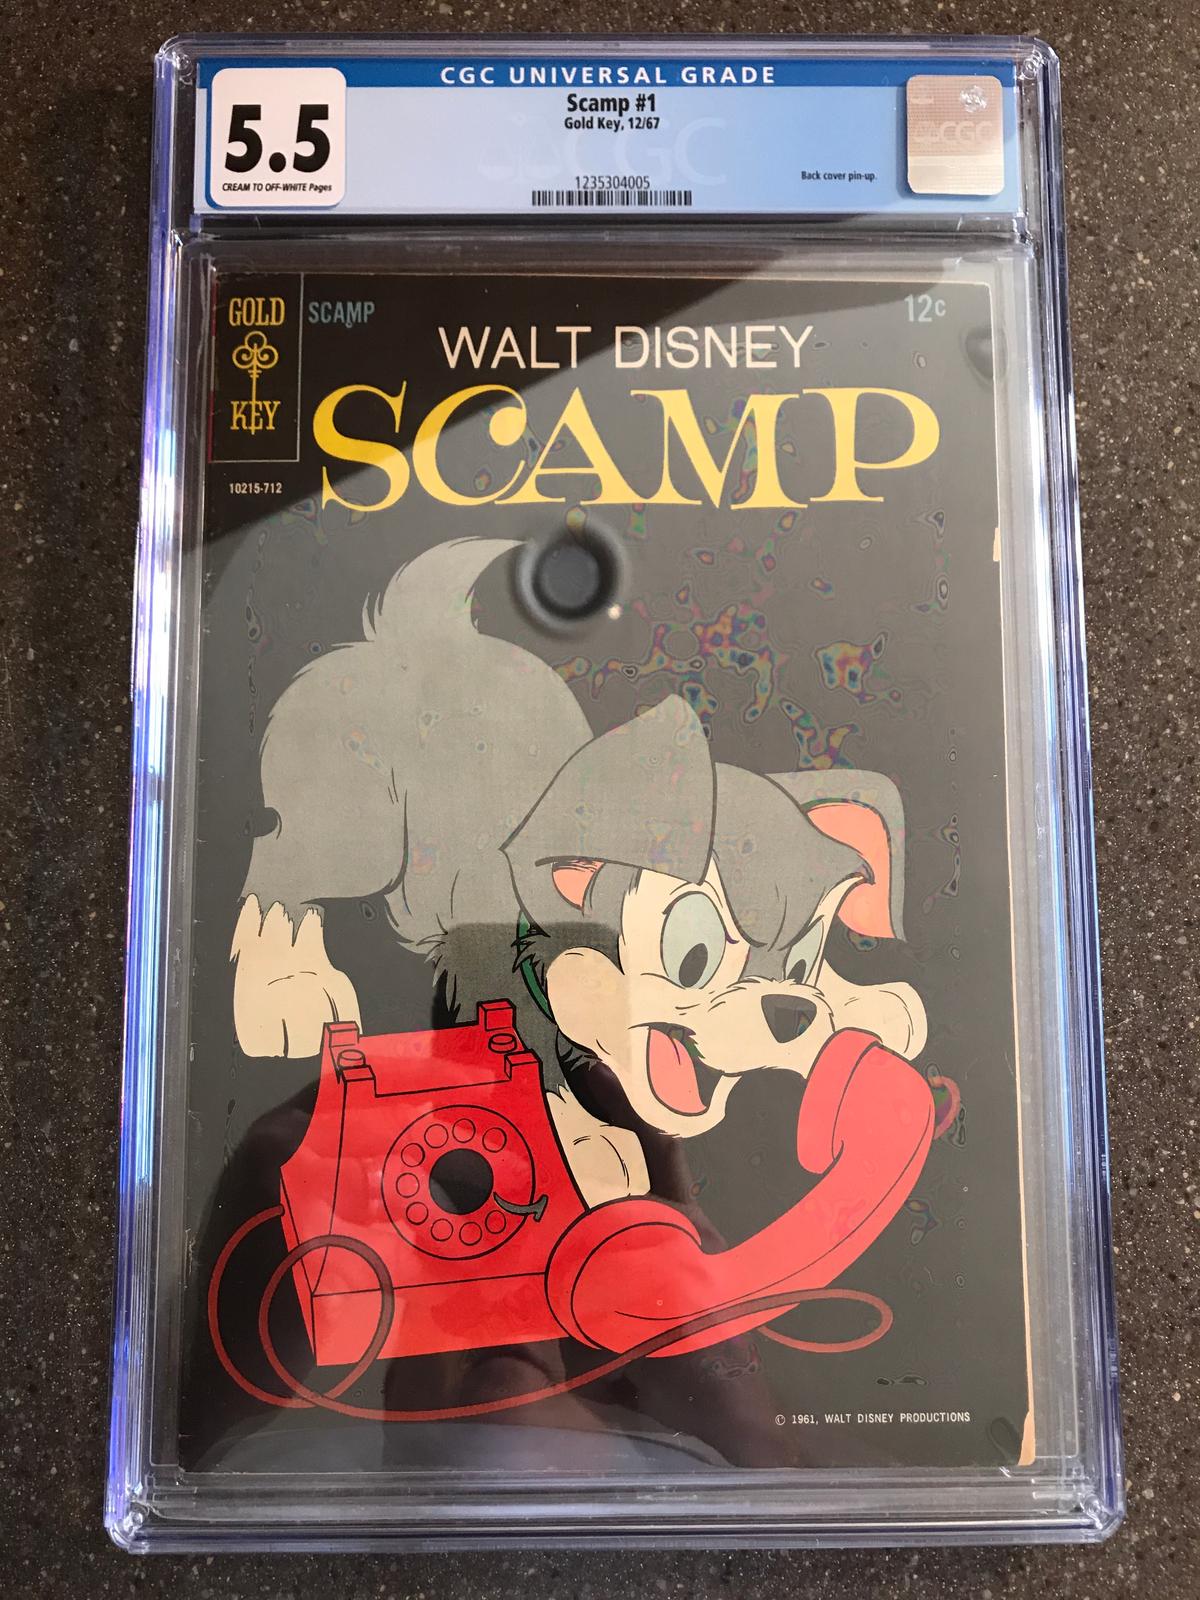 Walt Disney SCAMP Comic #1 Gold Key CGC Graded 5.5 Silver Age 1967 12 Cents Key First Issue